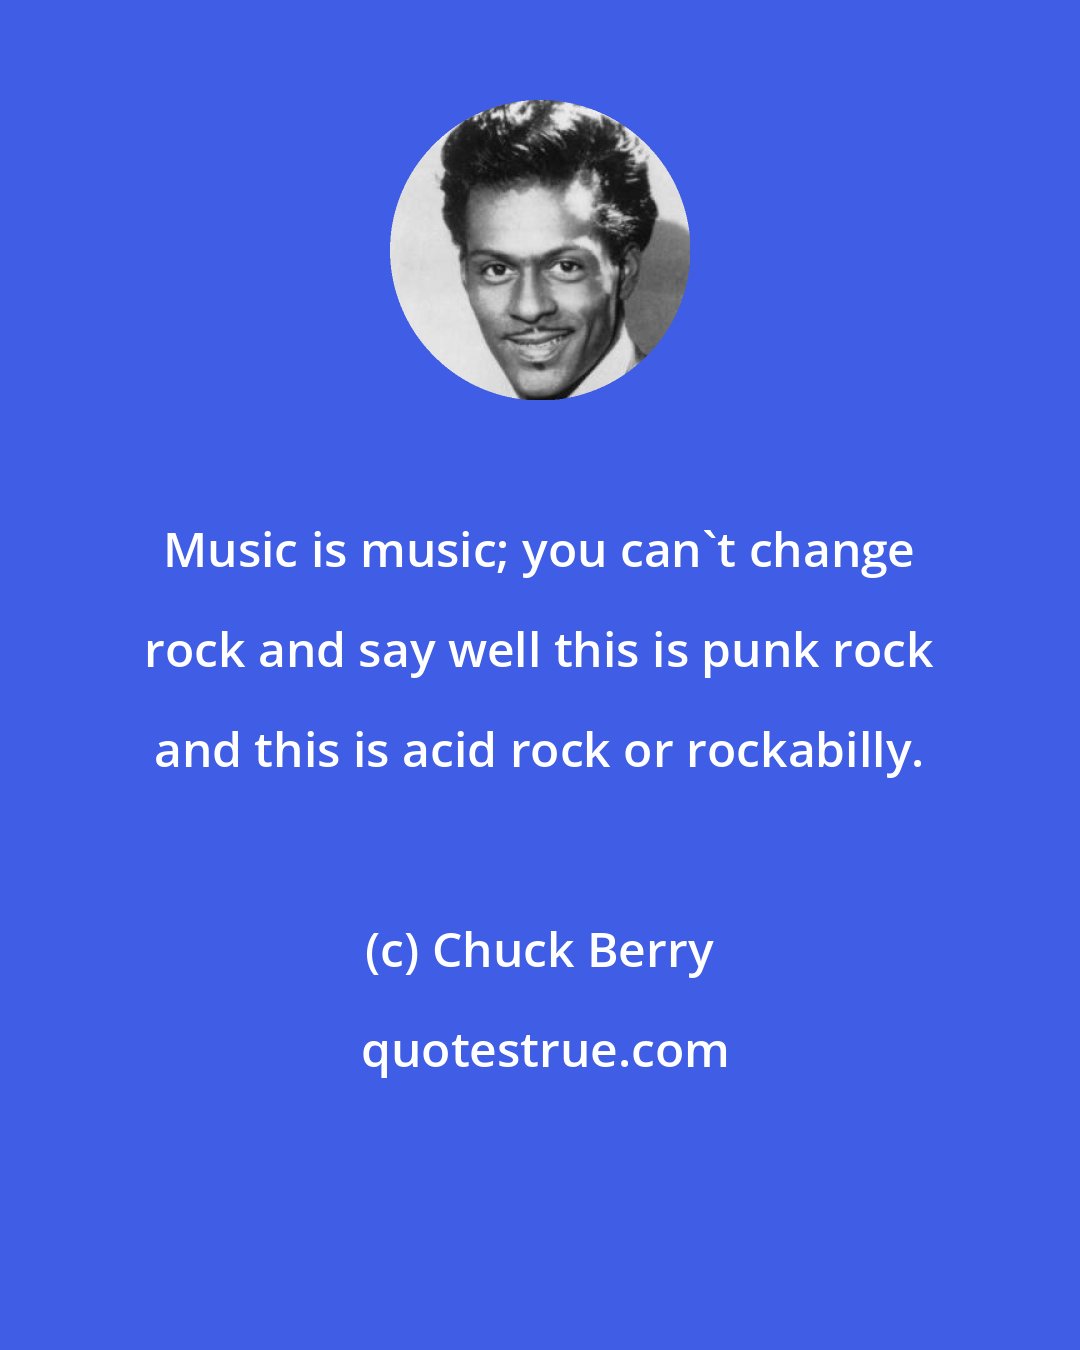 Chuck Berry: Music is music; you can't change rock and say well this is punk rock and this is acid rock or rockabilly.